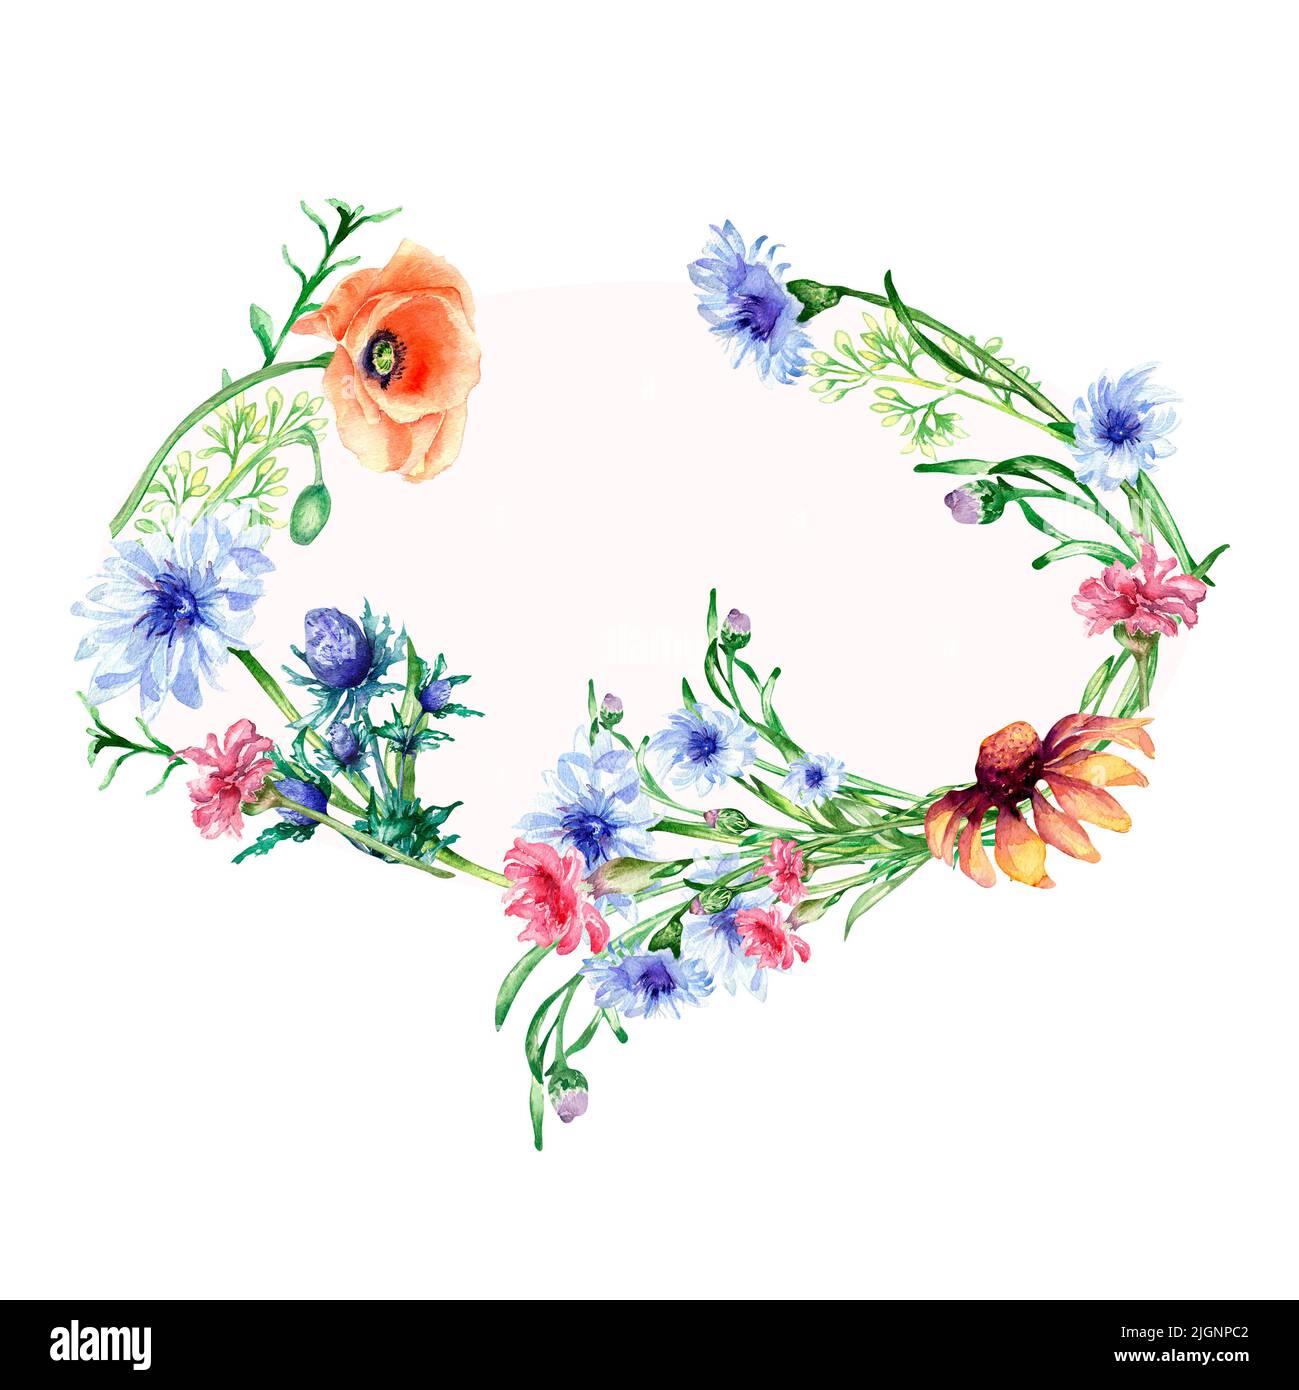 Frame with meadow colorful flowers watercolor illustration isolated. Wildflowers poppy, blue cornflower wreath hand painted. Design elements for greet Stock Photo